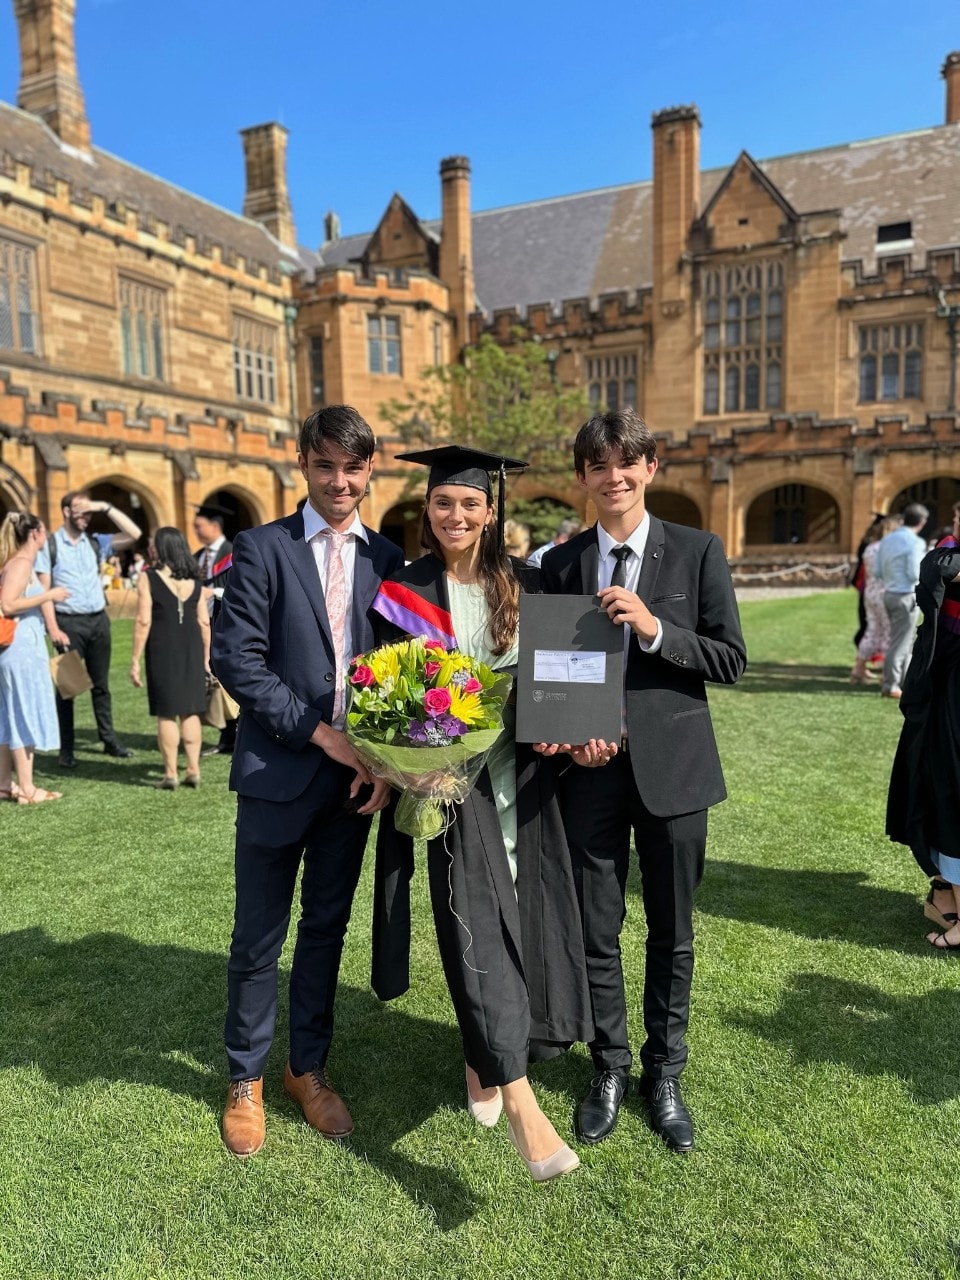 A young woman in graduation robes stands between two young men in suits outside a sandstone building.